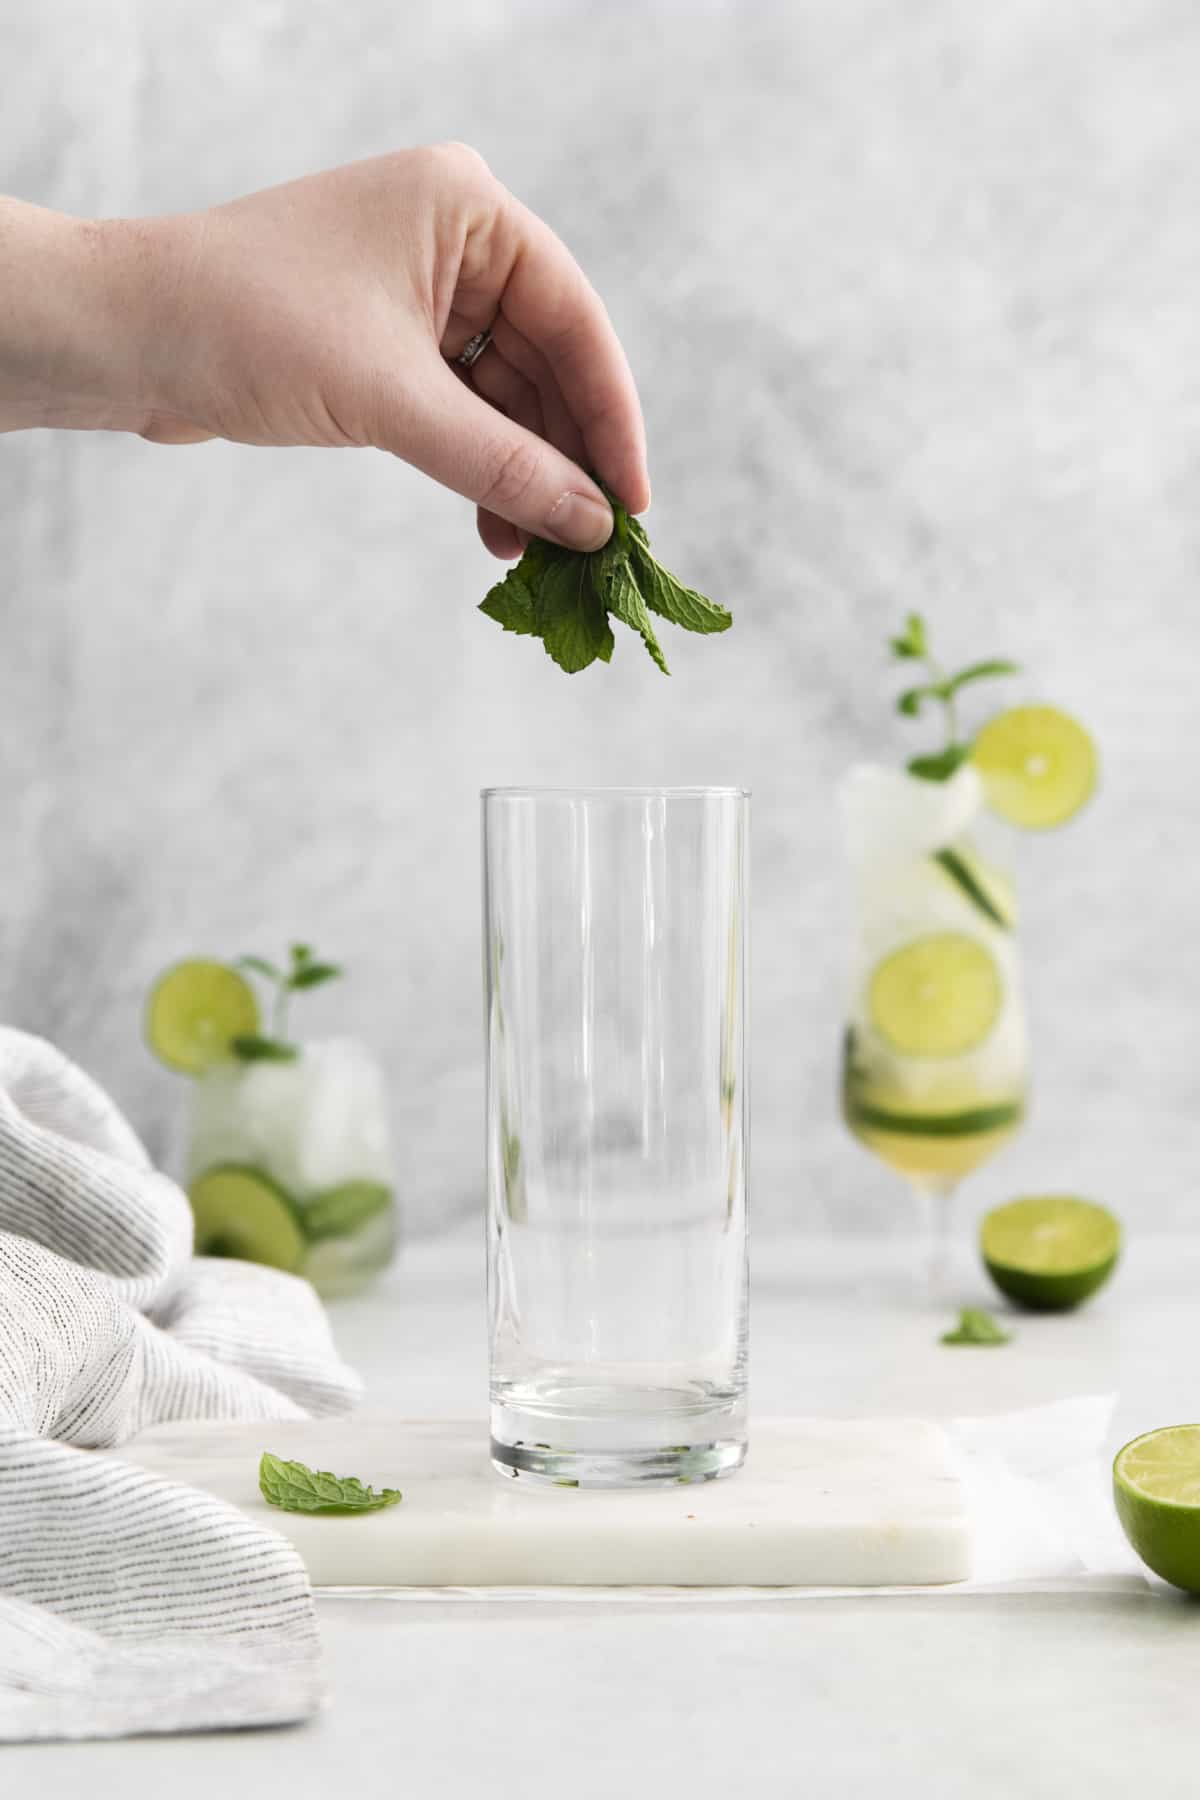 mint leaves being added to a glass.